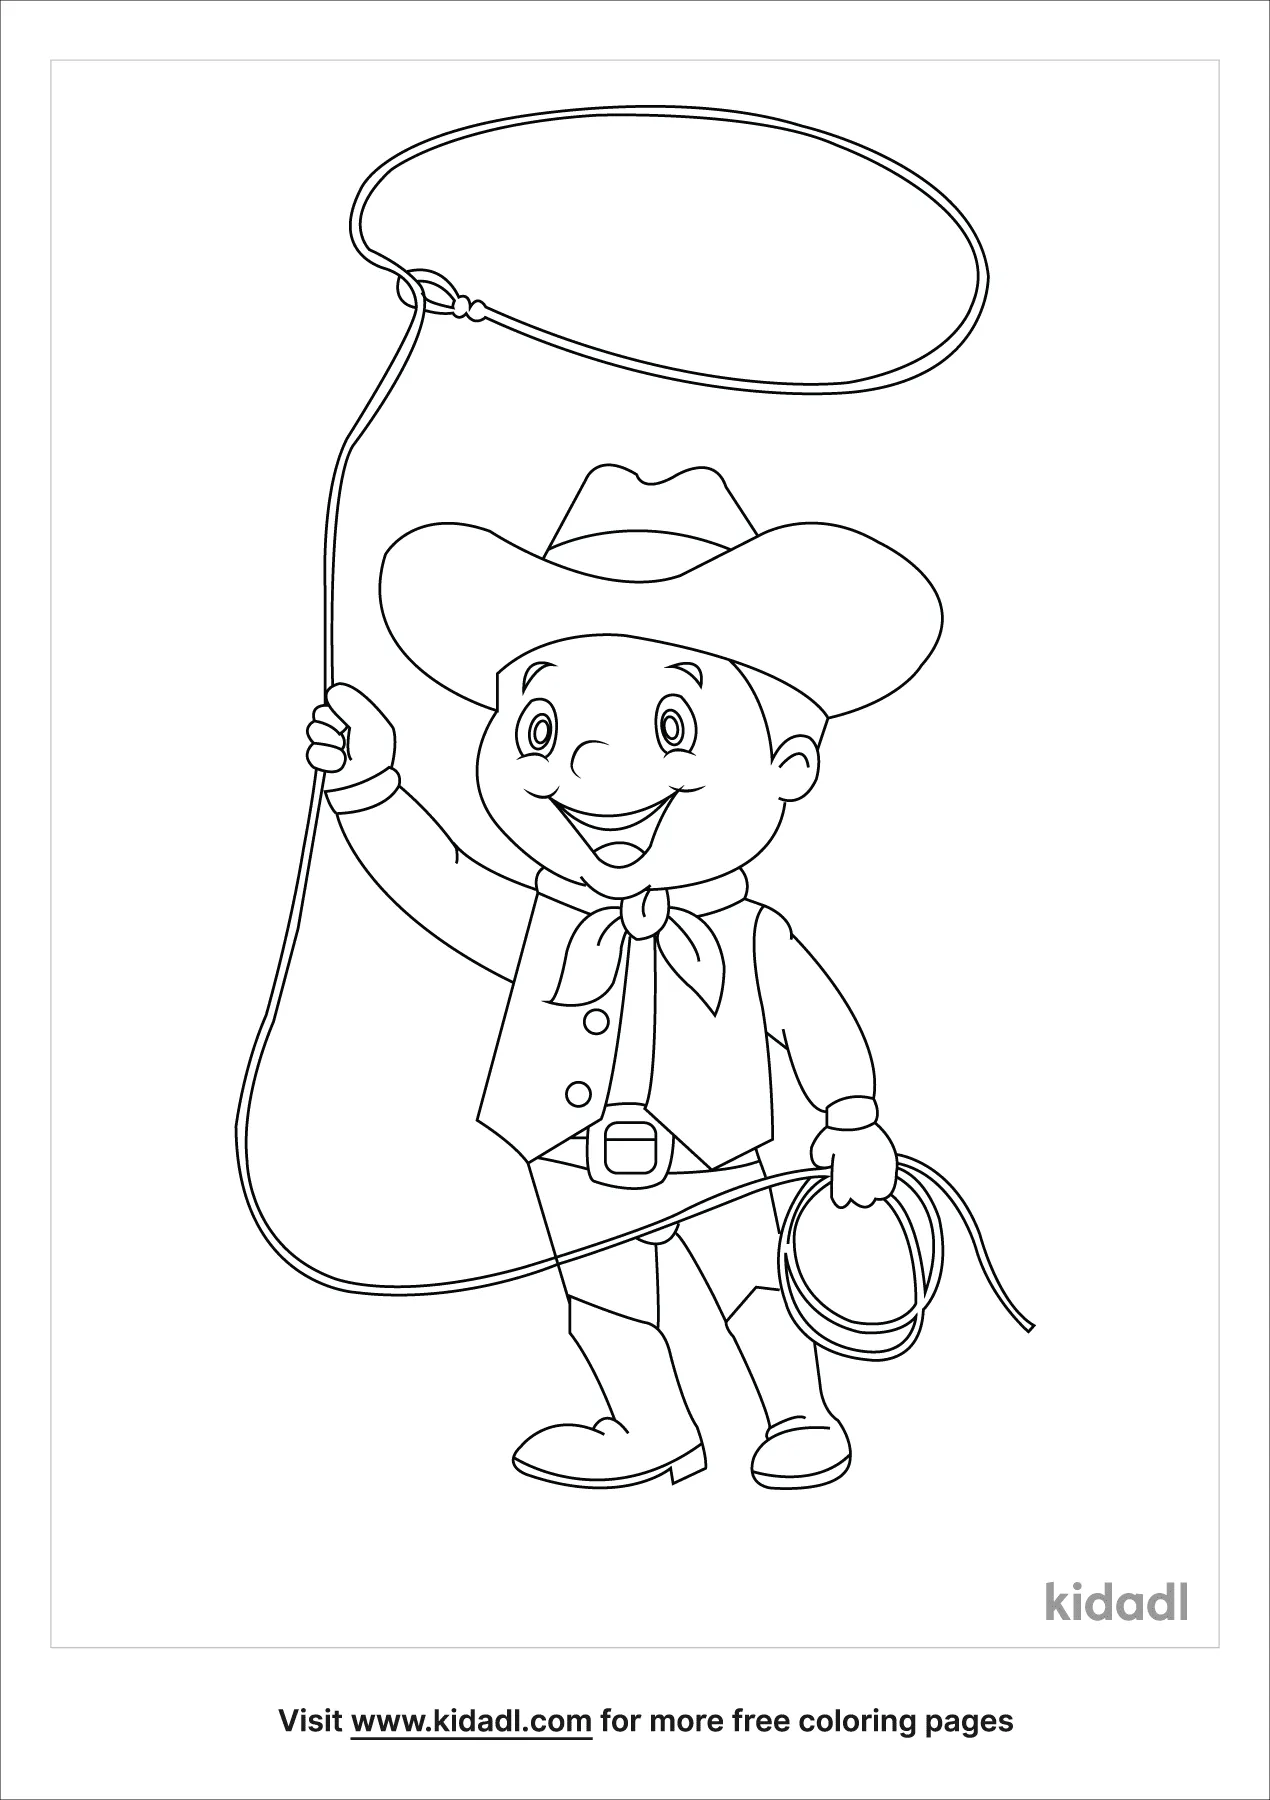 Cowboy With Lasso Coloring Page